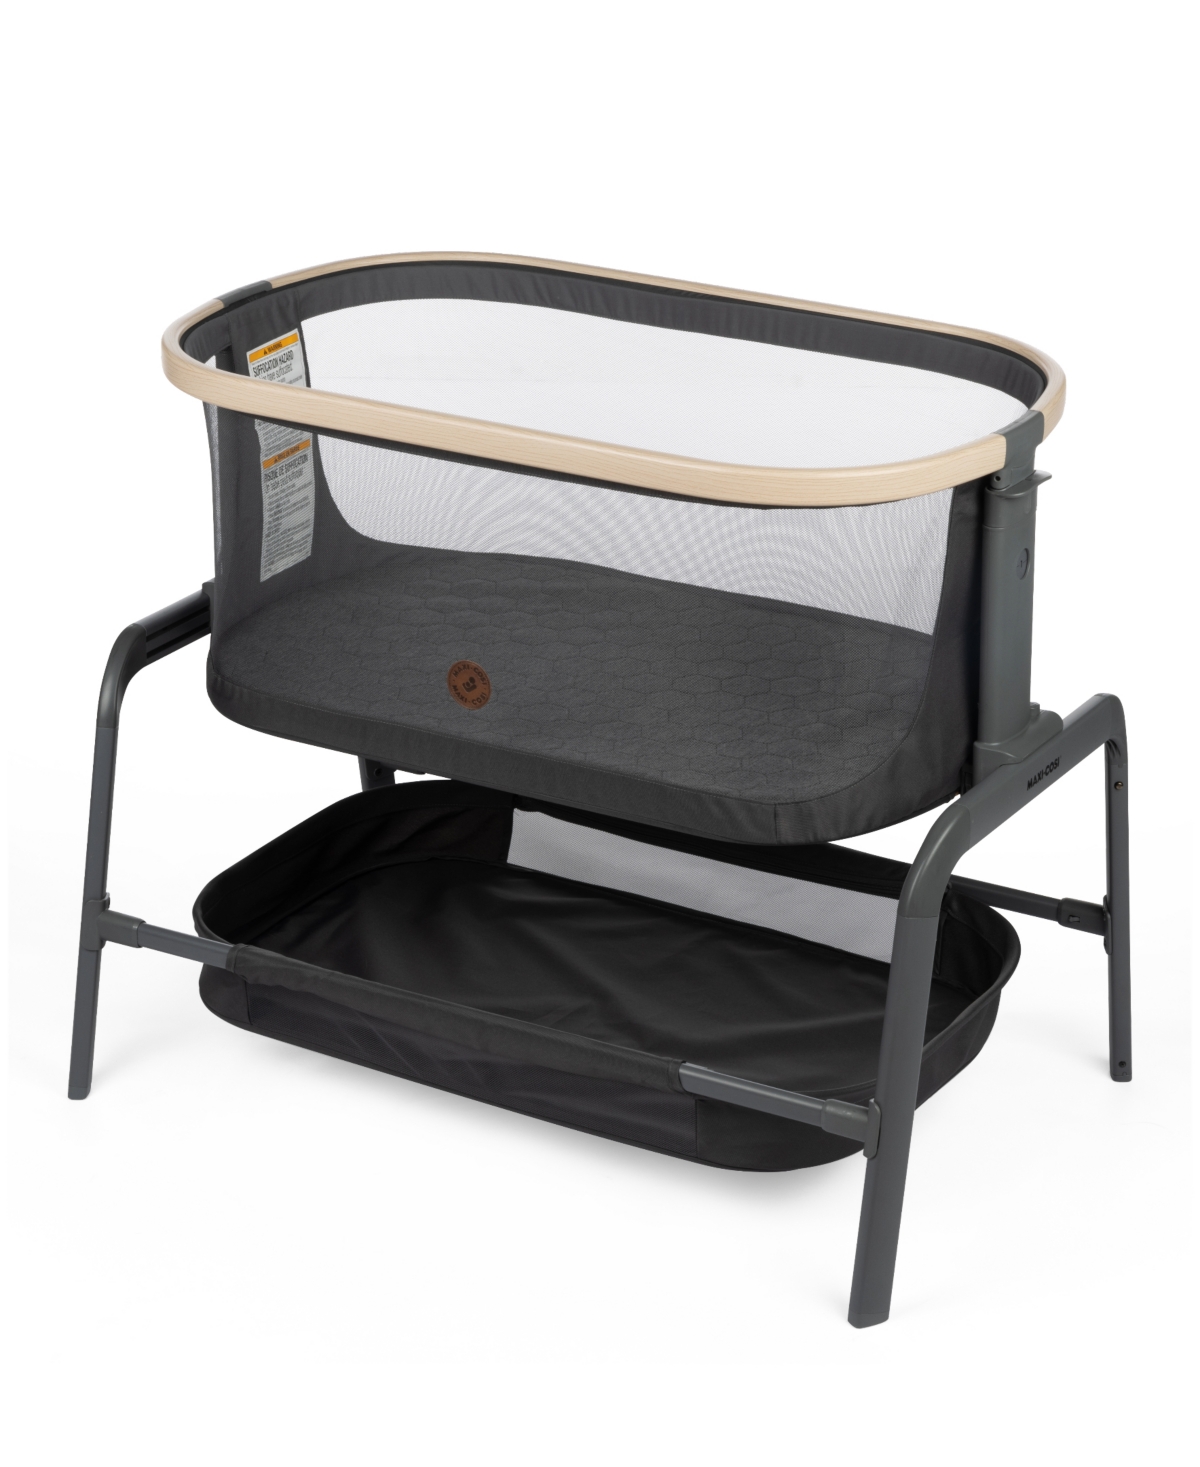 Maxi-cosi Baby Boys Or Baby Girls Iora Bedside Bassinet In Classic Graphite